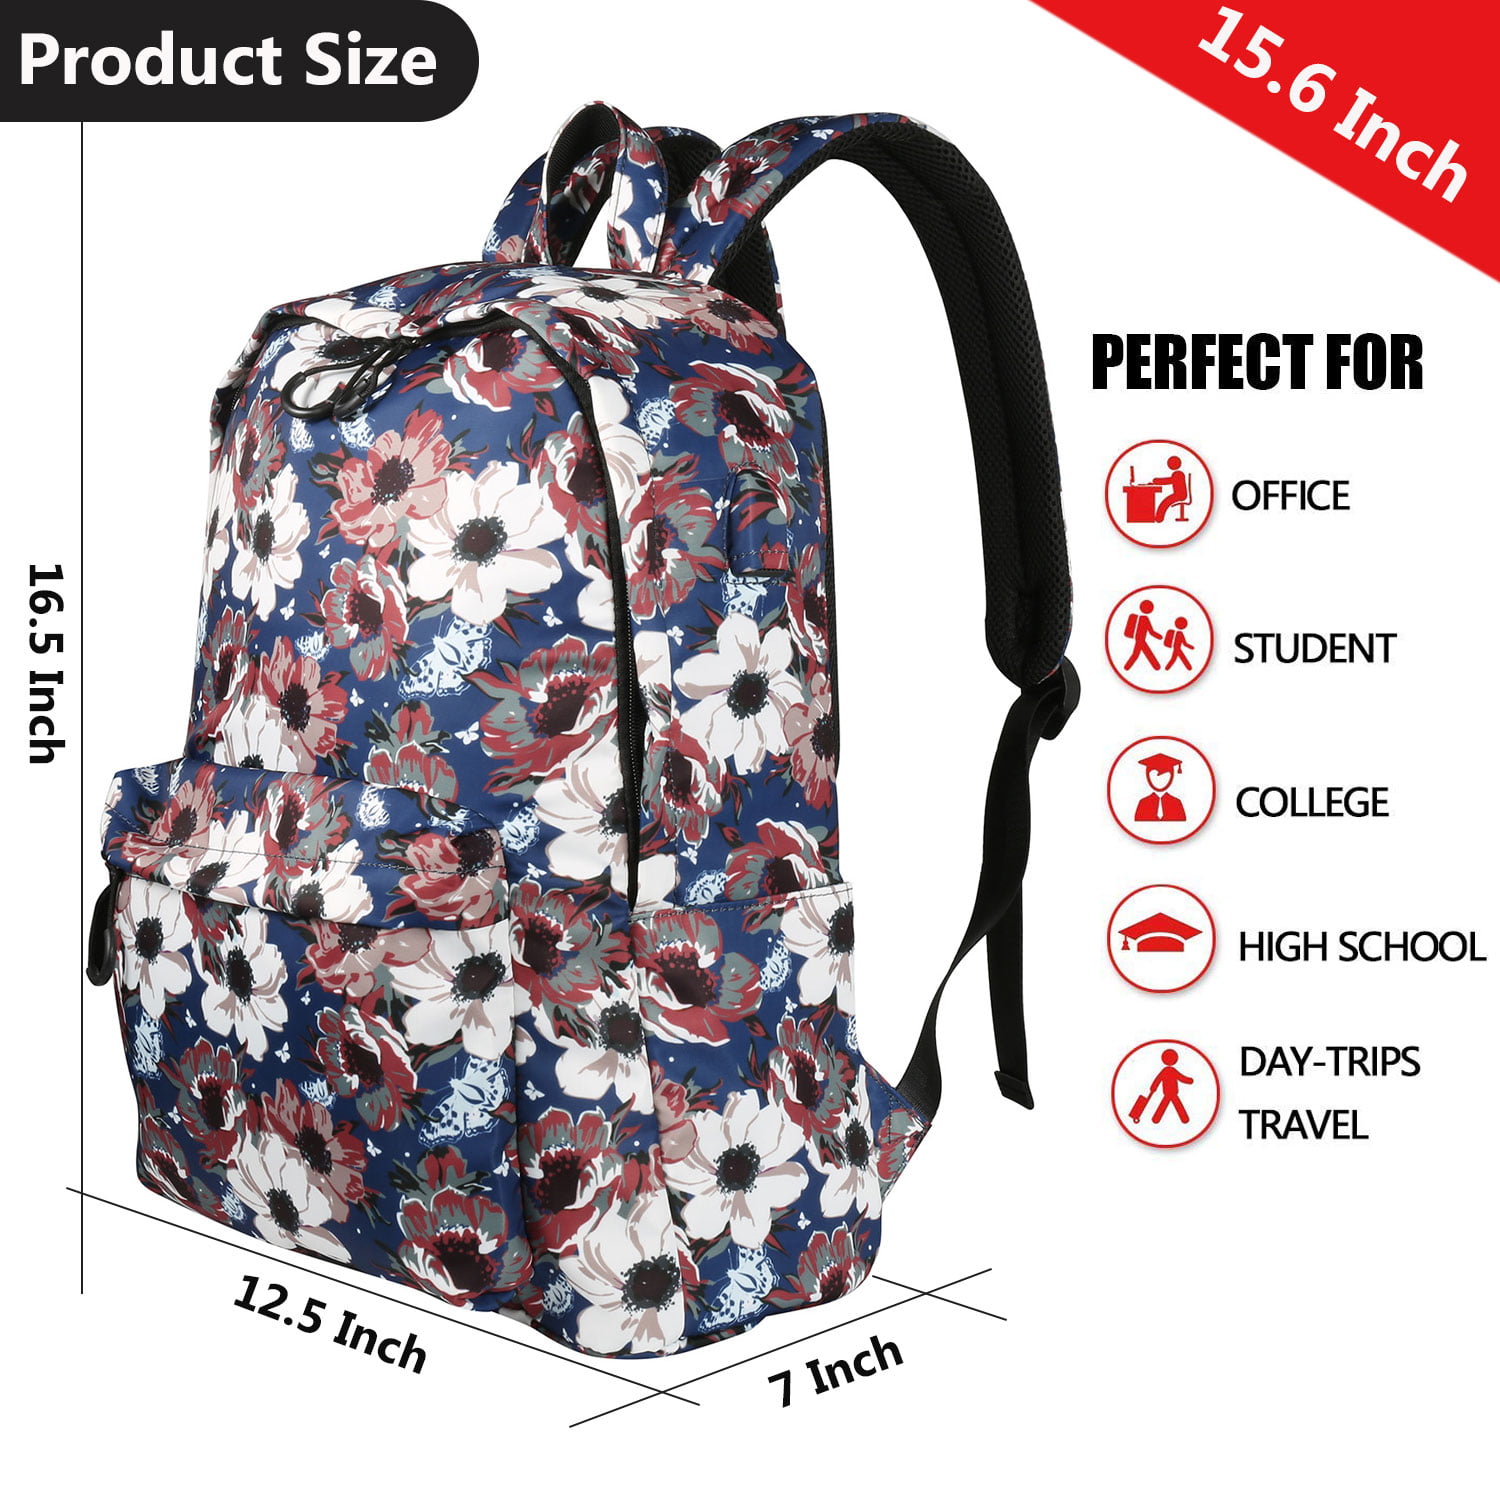 Laptop Backpack for women Cute Laptop Bag School Computer Bag Floral Laptop Purse with USB Charging Port 15.6-Inch 